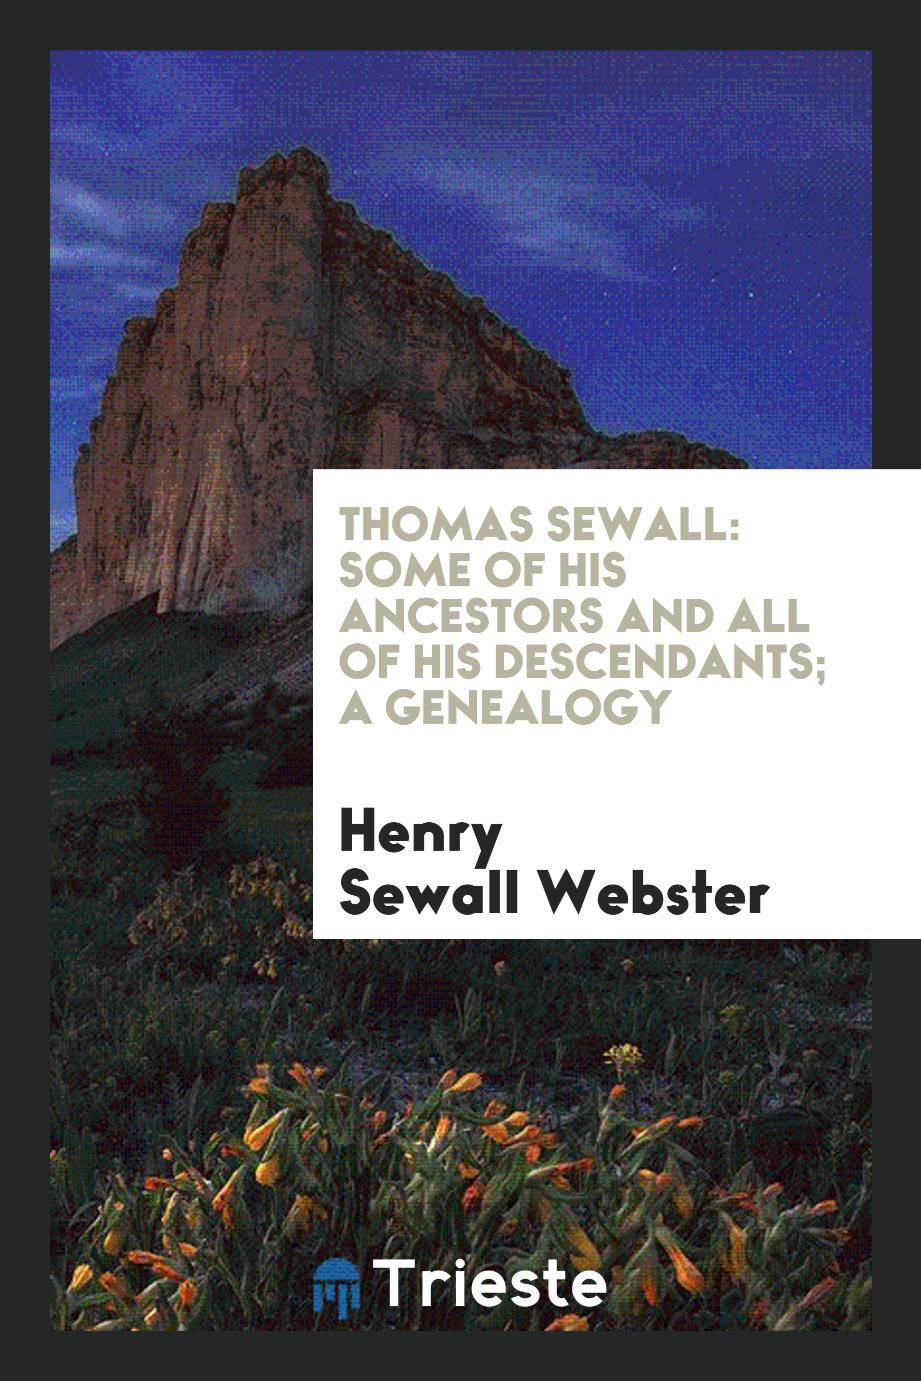 Thomas Sewall: some of his ancestors and all of his descendants; a genealogy